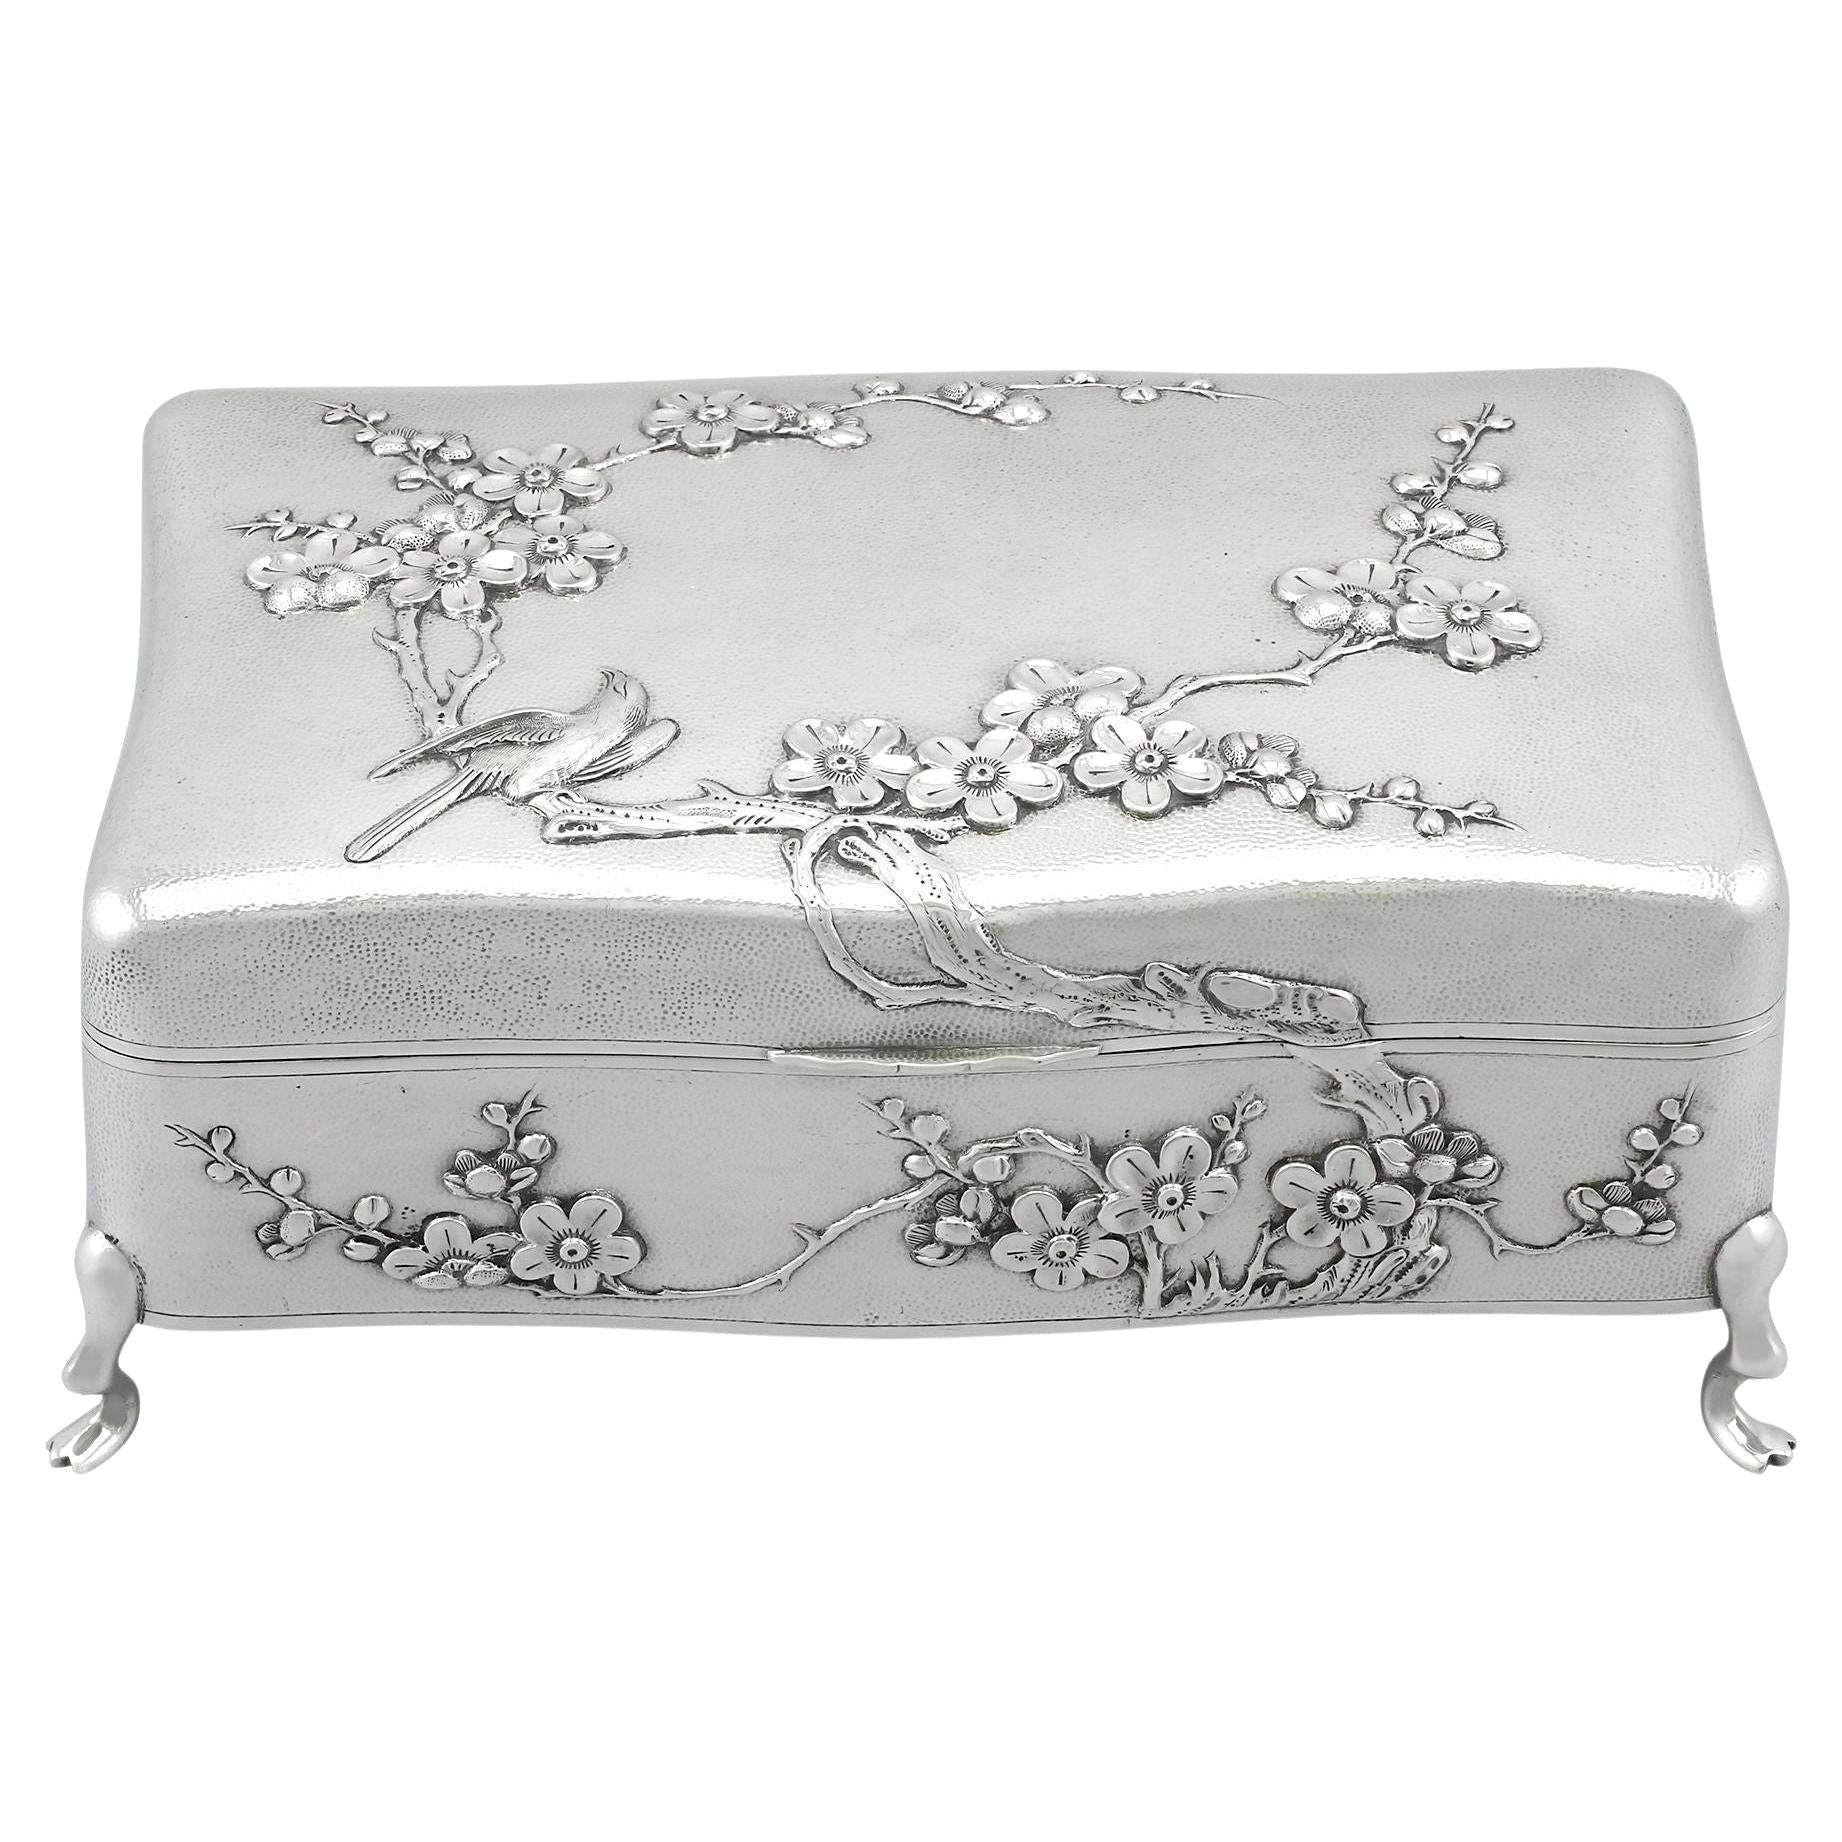 Antique Chinese Export Silver Jewellery Box, circa 1895